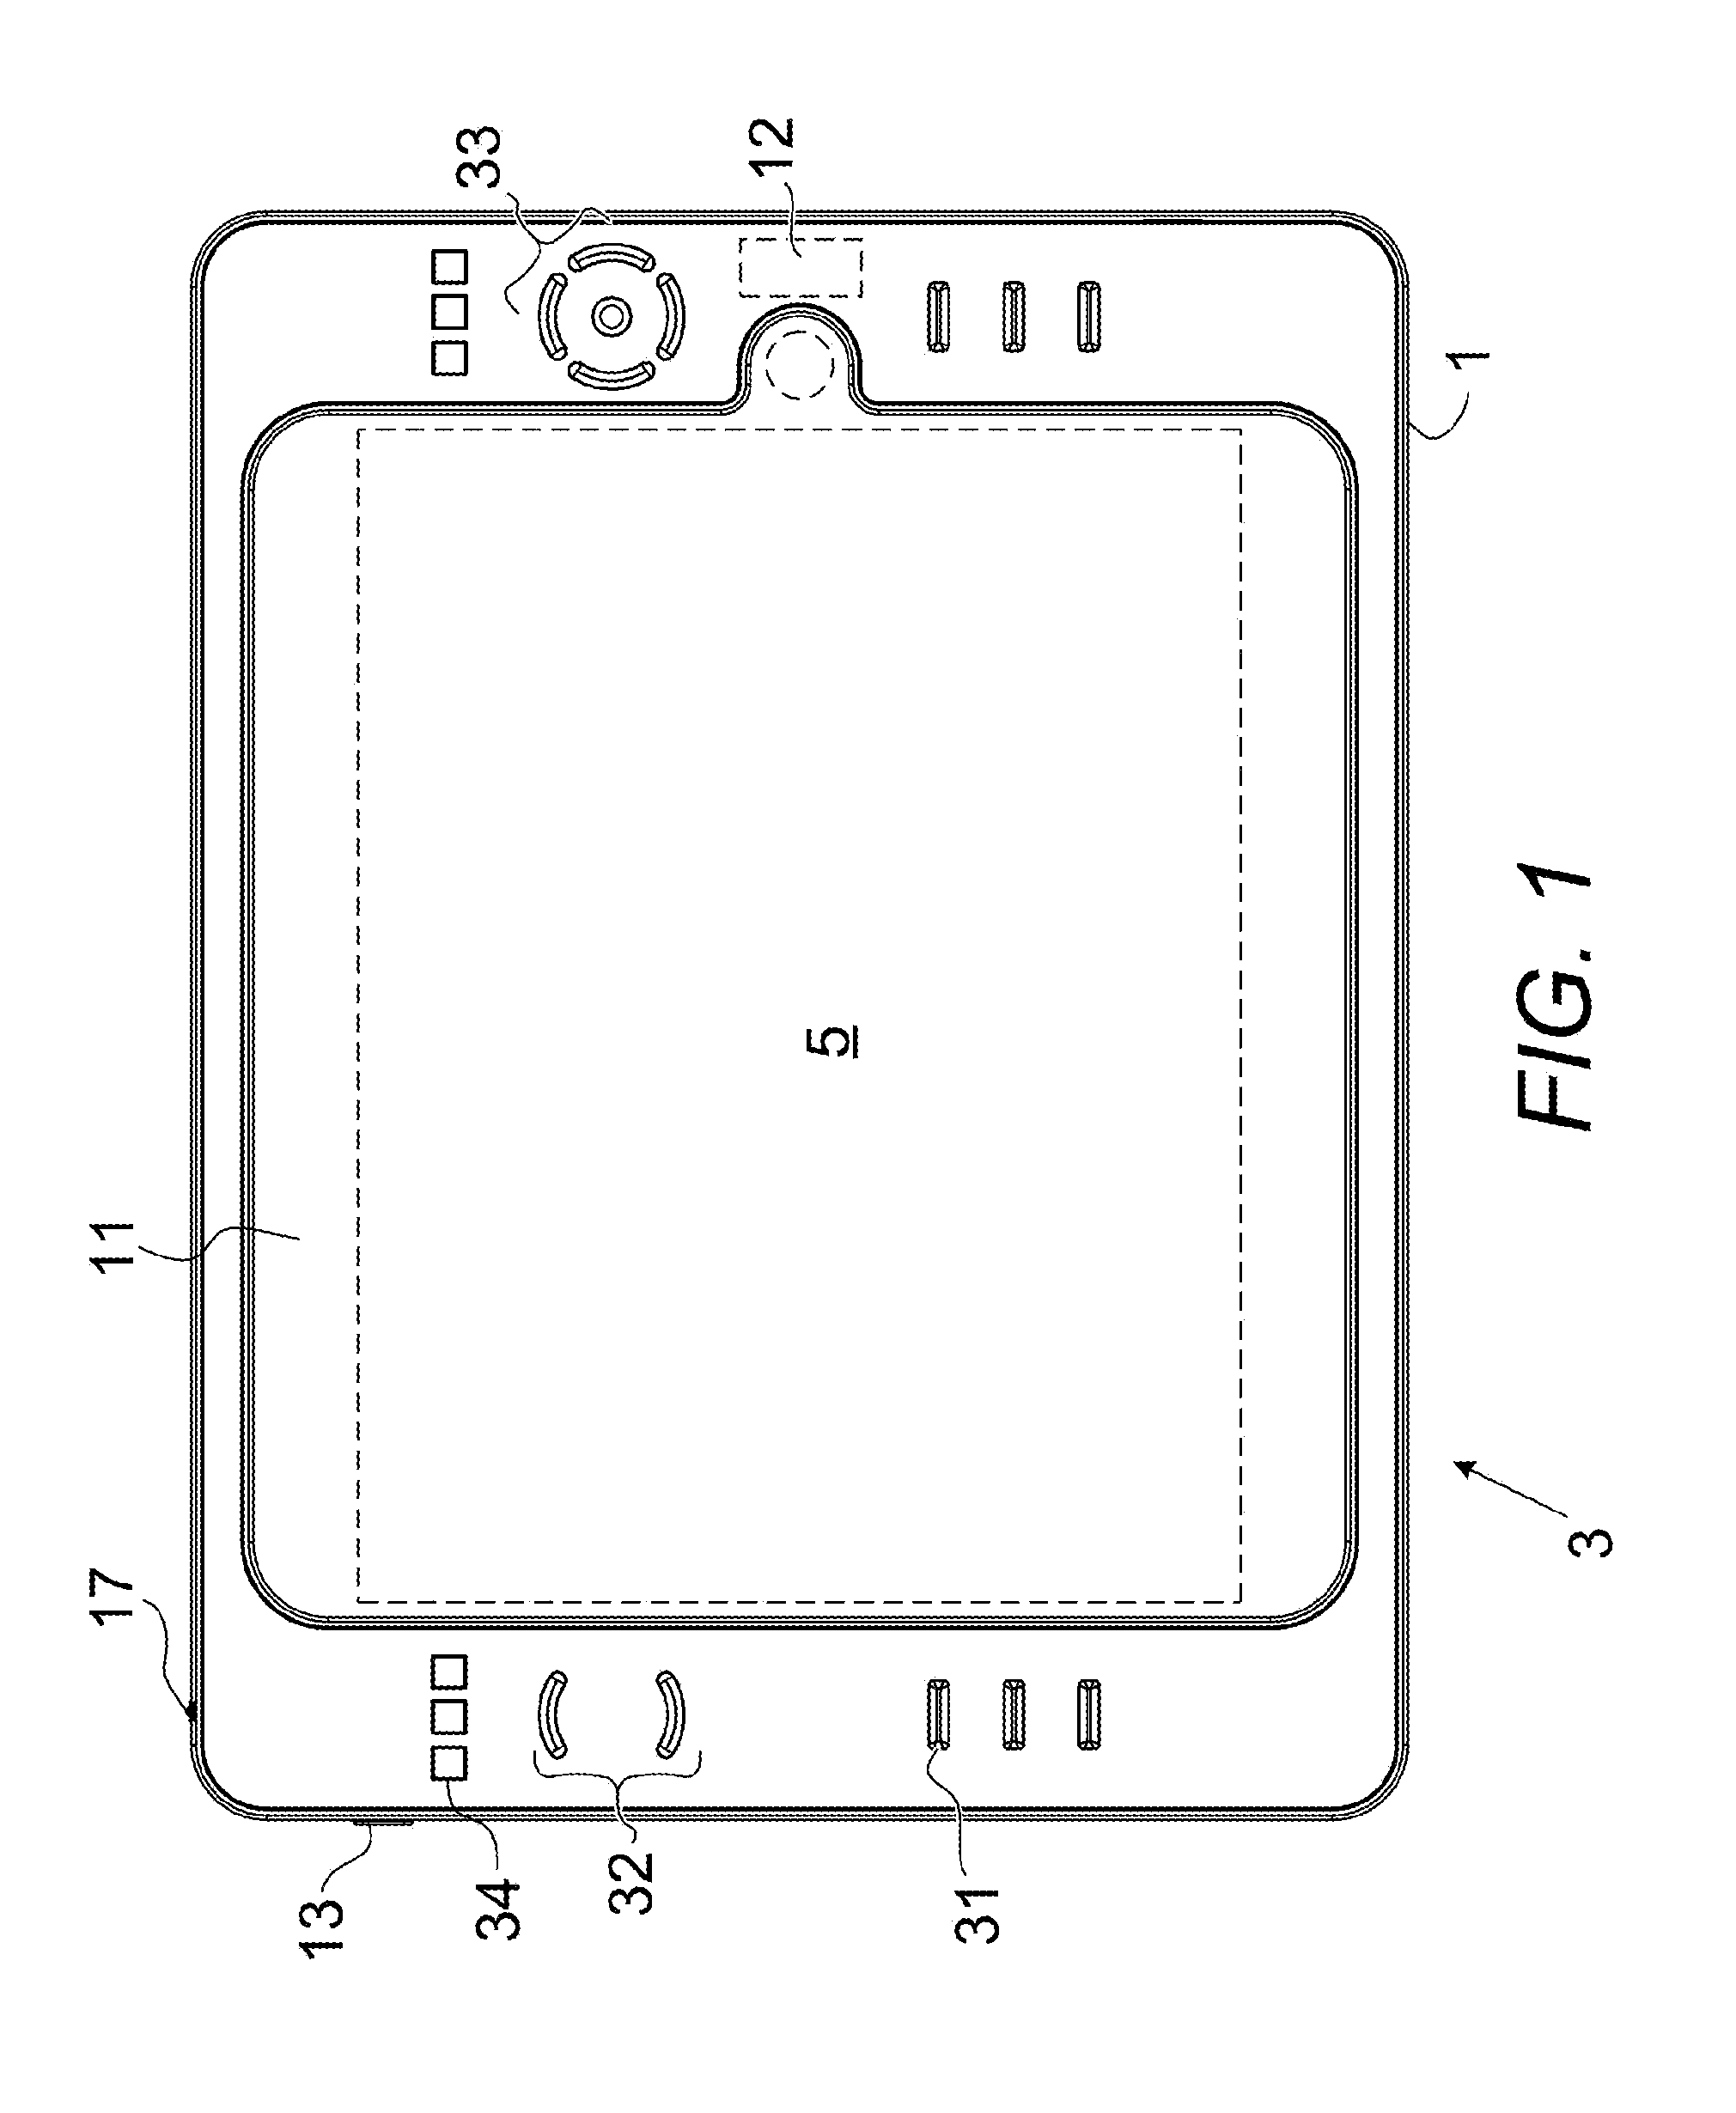 Control System for Augmenting a Portable Touch Screen Device